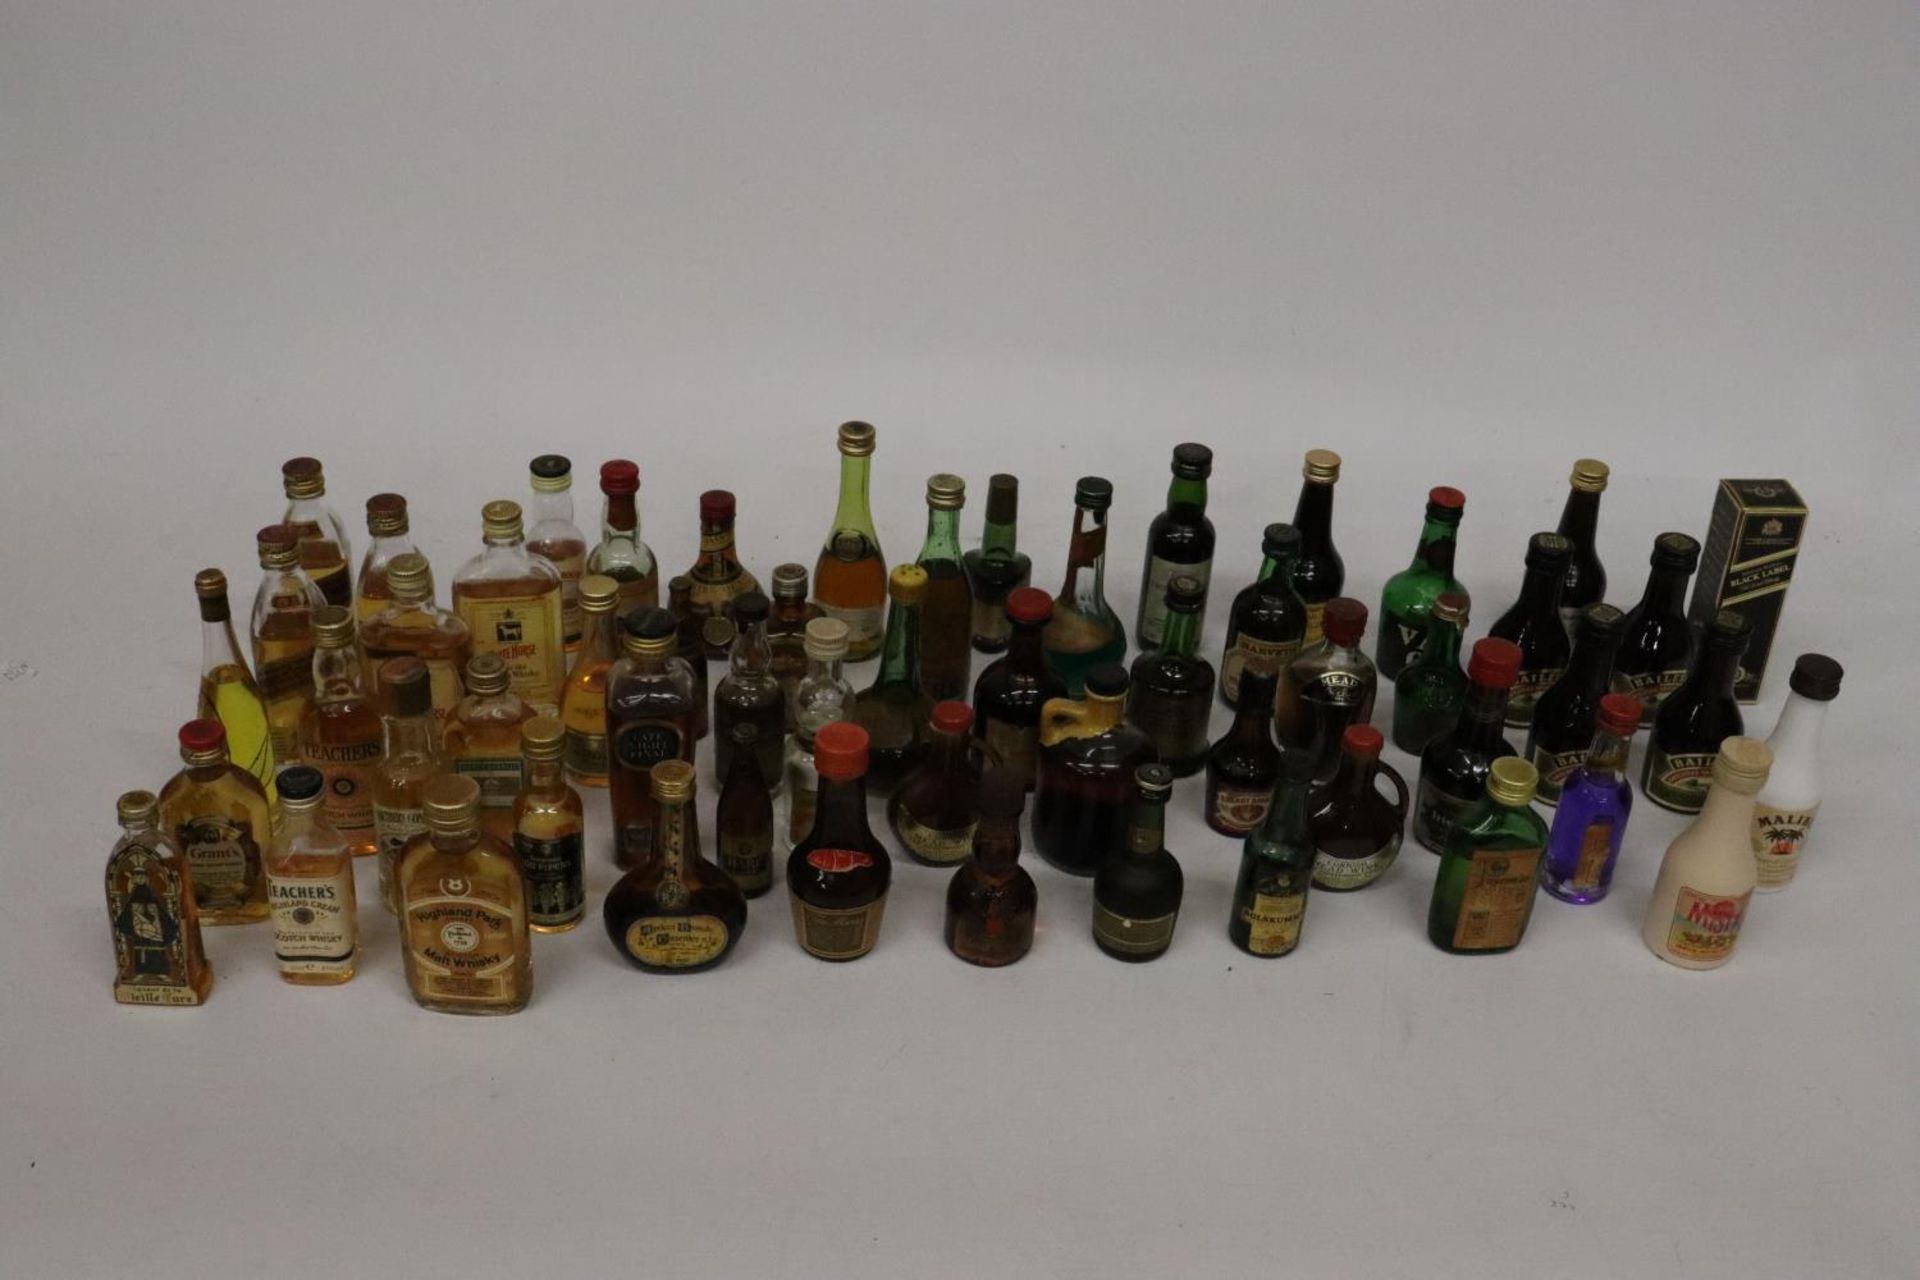 A LARGE QUANTITY OF MINIATURE BOTTLES OF ALCOHOL